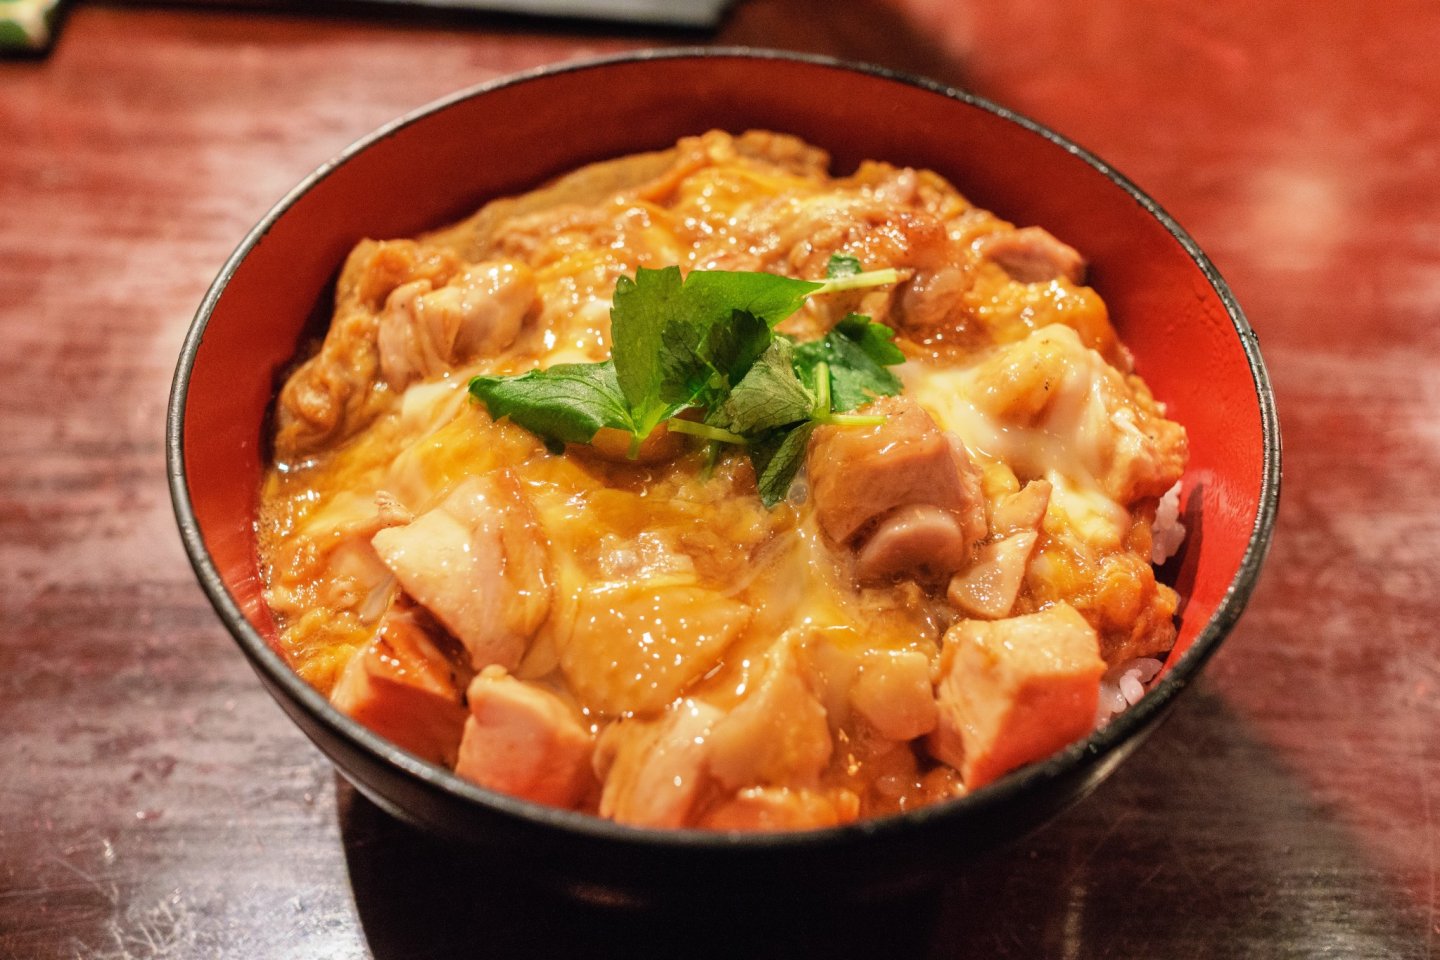 Oyakodon - the iconic chicken and egg rice dish of Japan